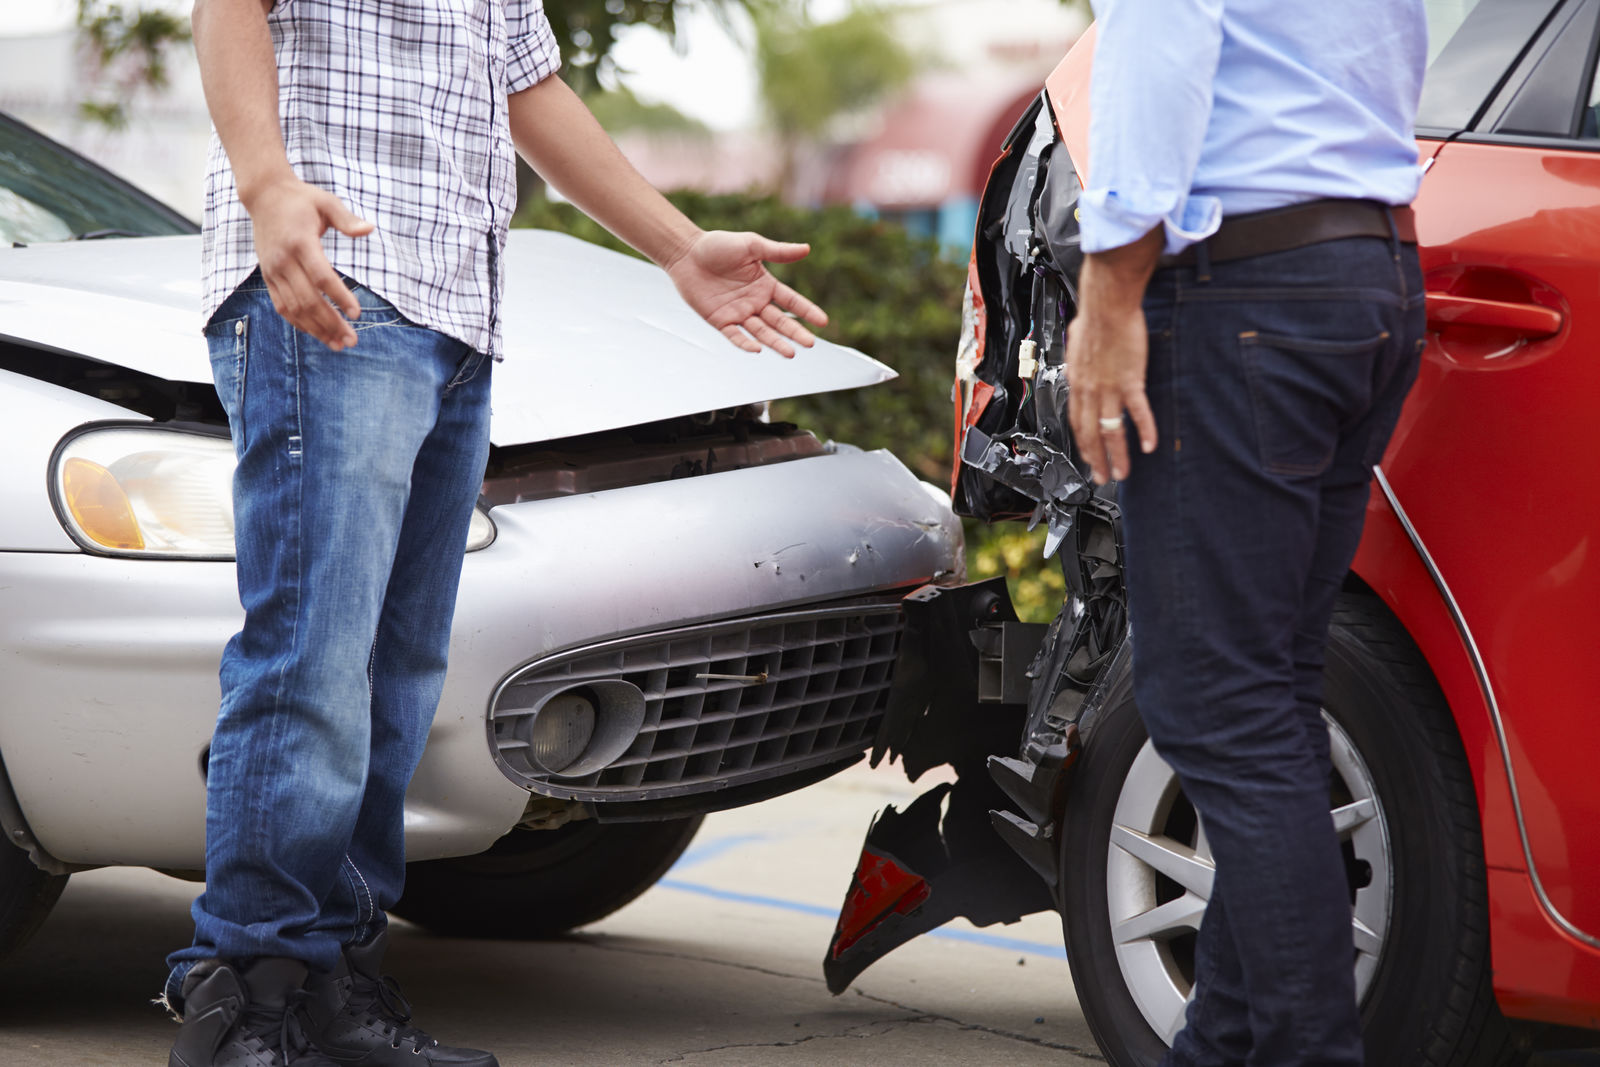 Who is at fault in a car accident?